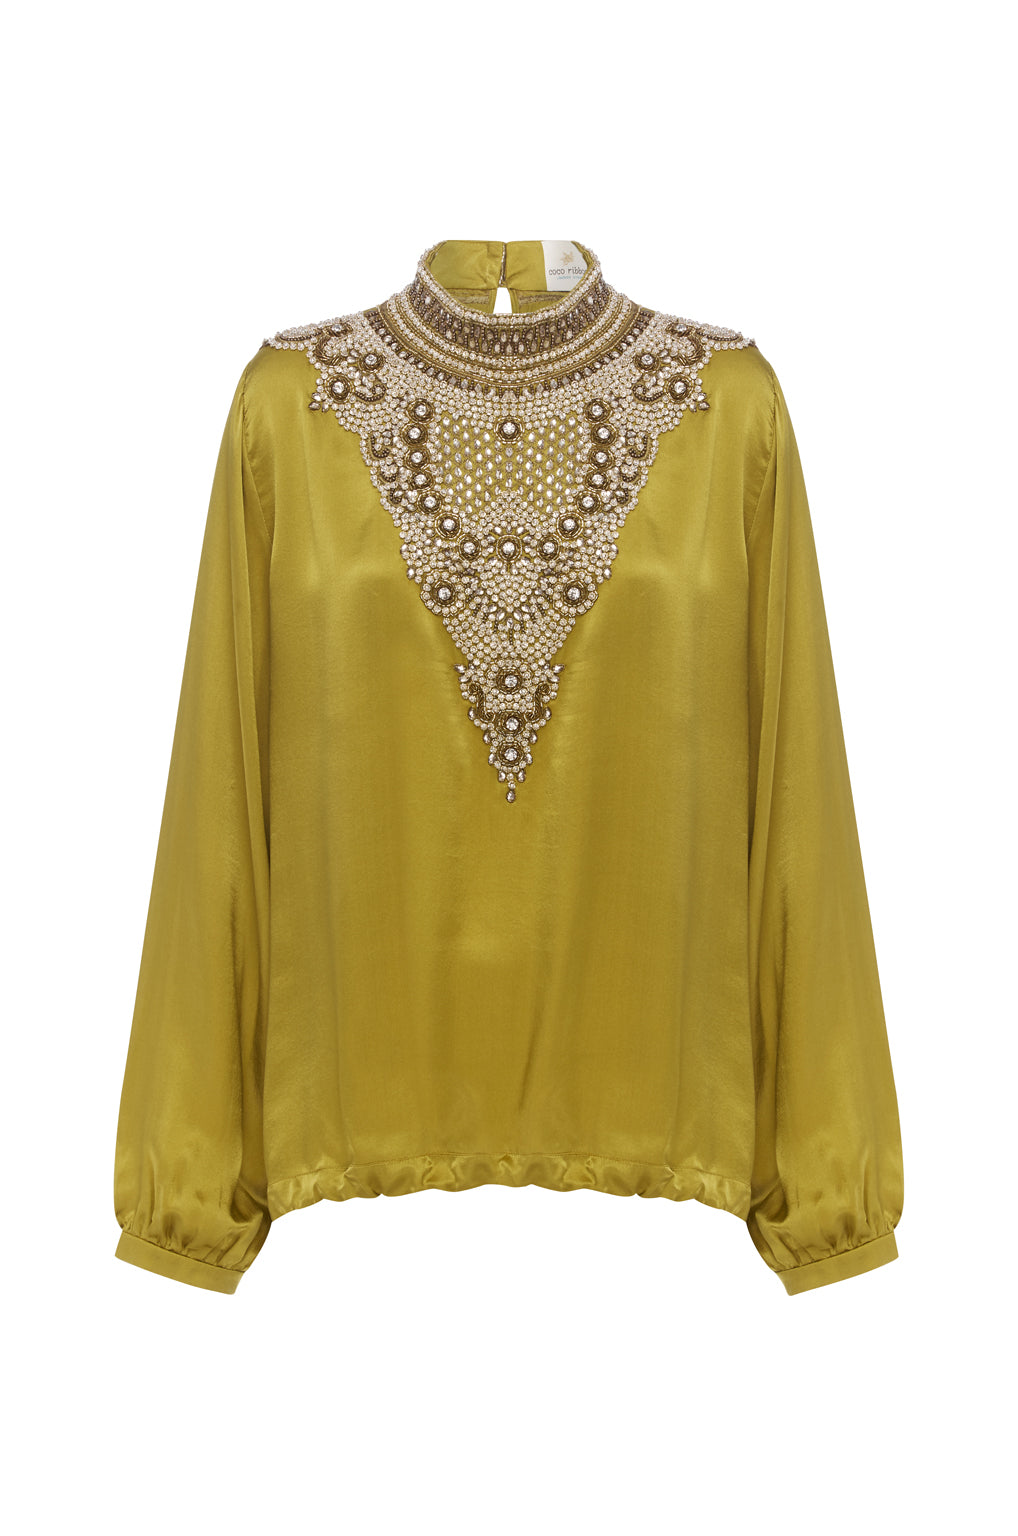 Embellished Round Neck Blouse in Silk Satin Gold